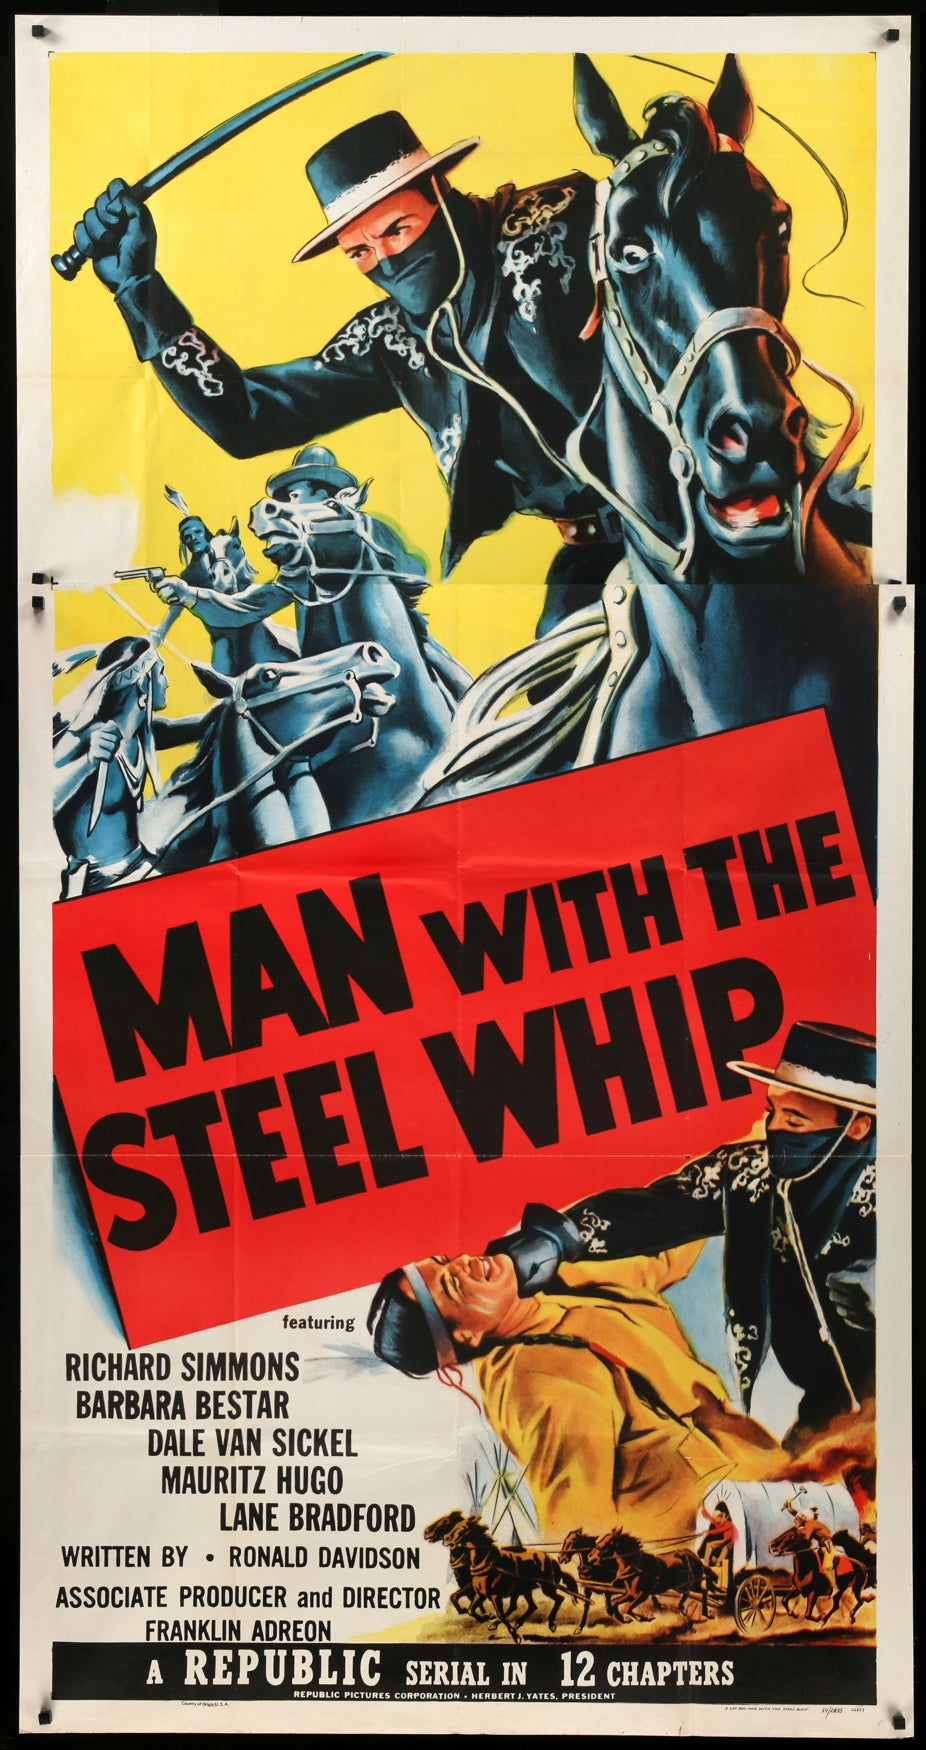 Man with the Steel Whip (1954) original movie poster for sale at Original Film Art